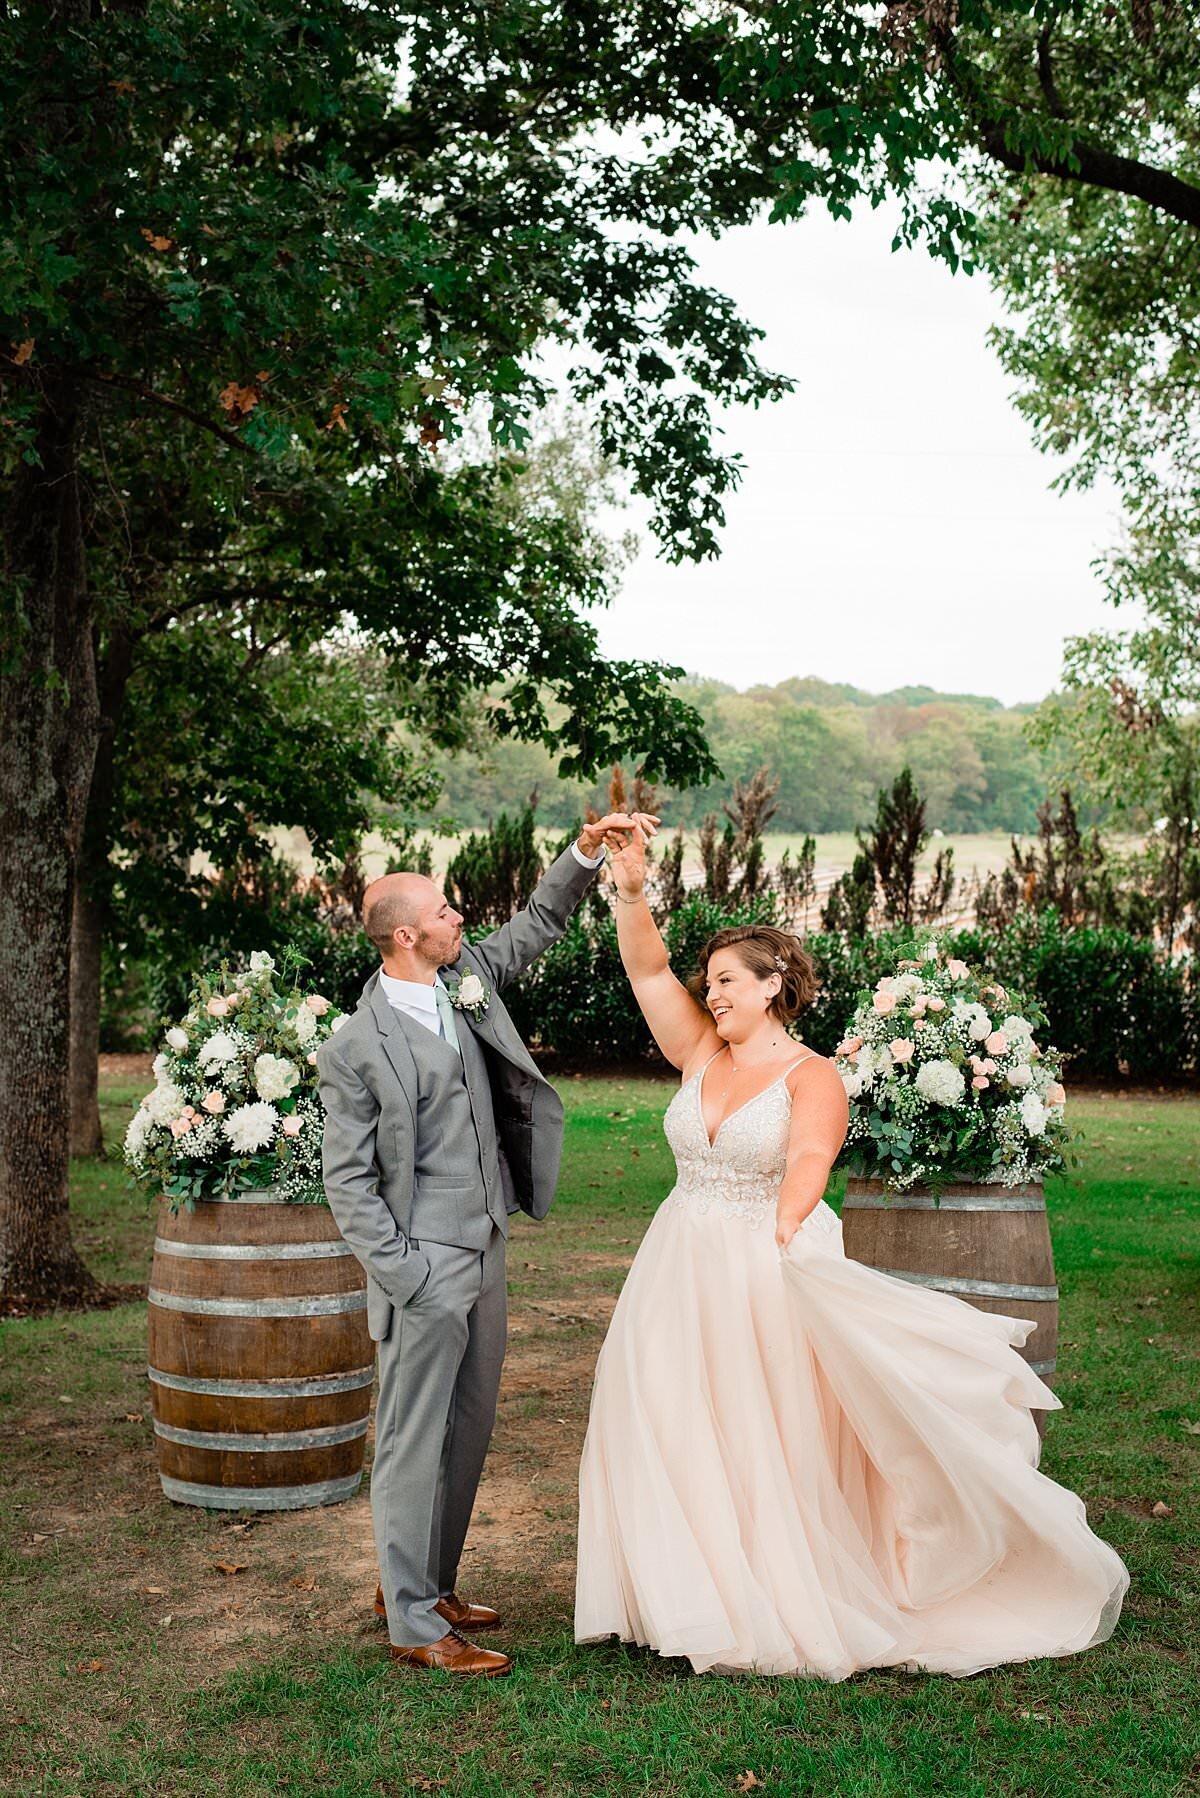 Bride wearing a tulle skirt ballgown in a soft blush twirling with her husband in front of wine barrels with large flower arrangements on top of them